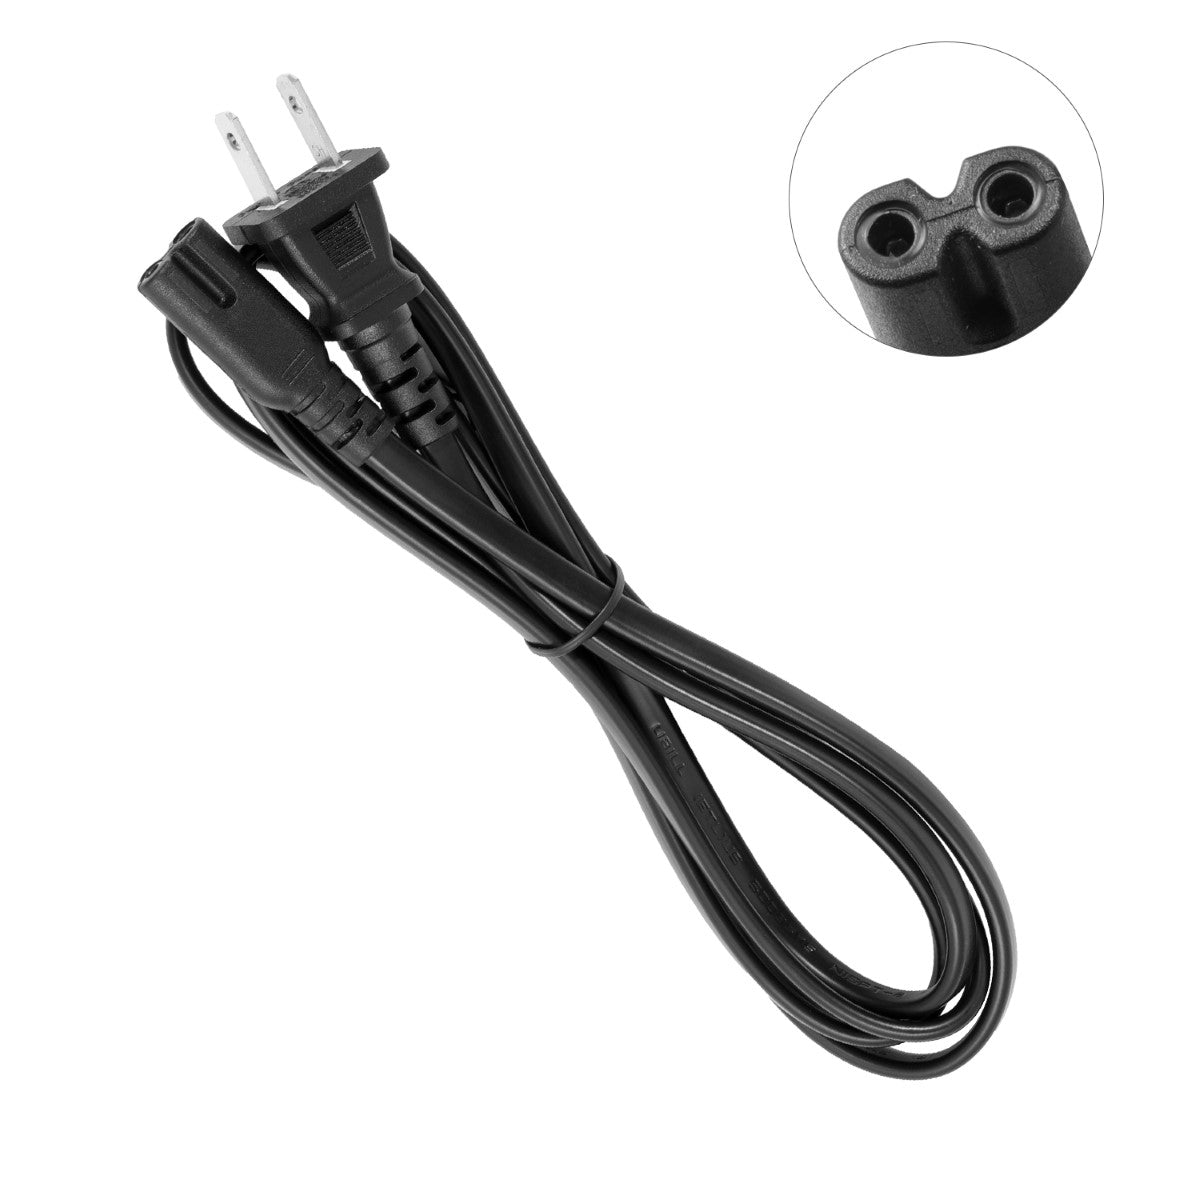 Power Cord for Epson Expression XP-420 Printer.